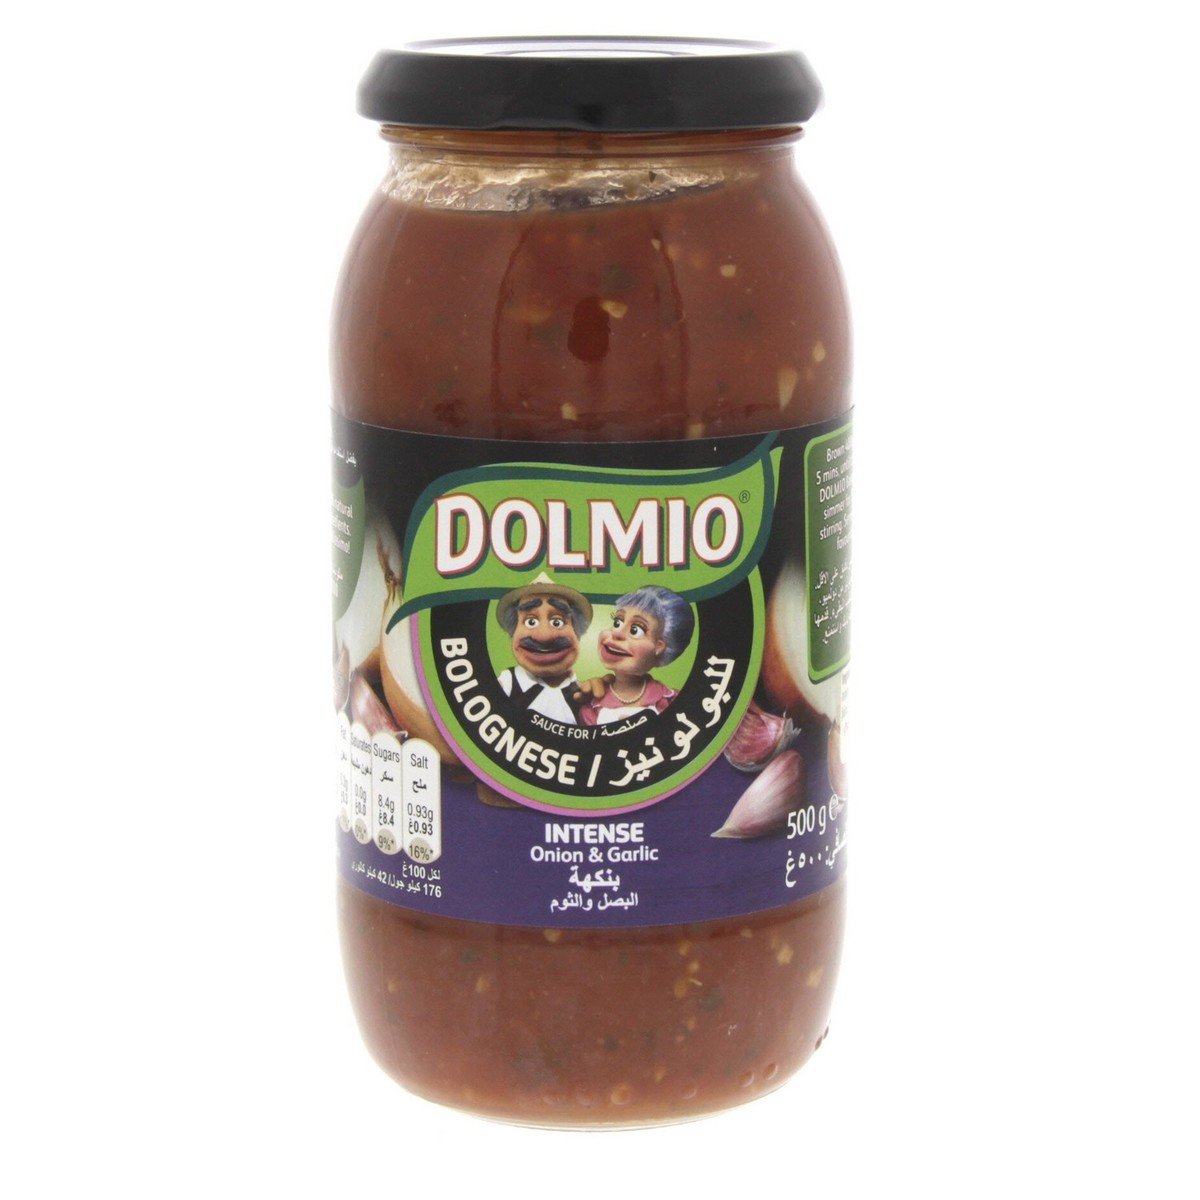 Buy Dolmio Bolognese Intense Tomato Sauce 500 g Online at Best Price | Cooking Sauce | Lulu UAE in UAE